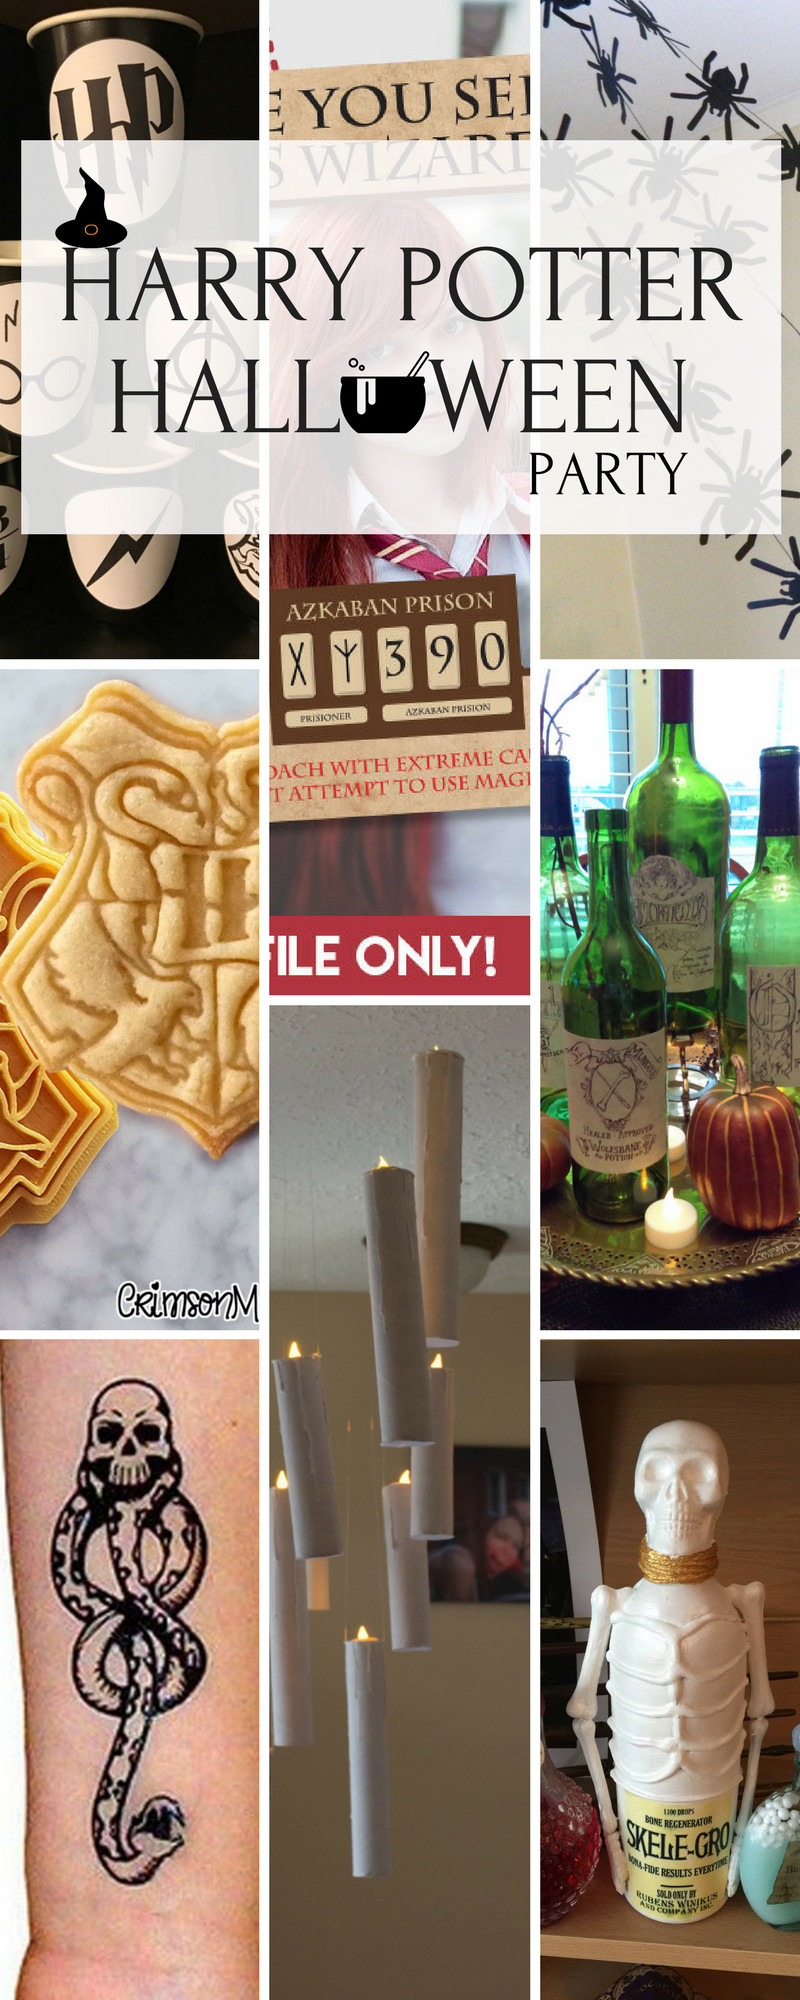 Harry Potter Halloween Party Ideas
 Ideas for a Spooky Harry Potter Halloween Party